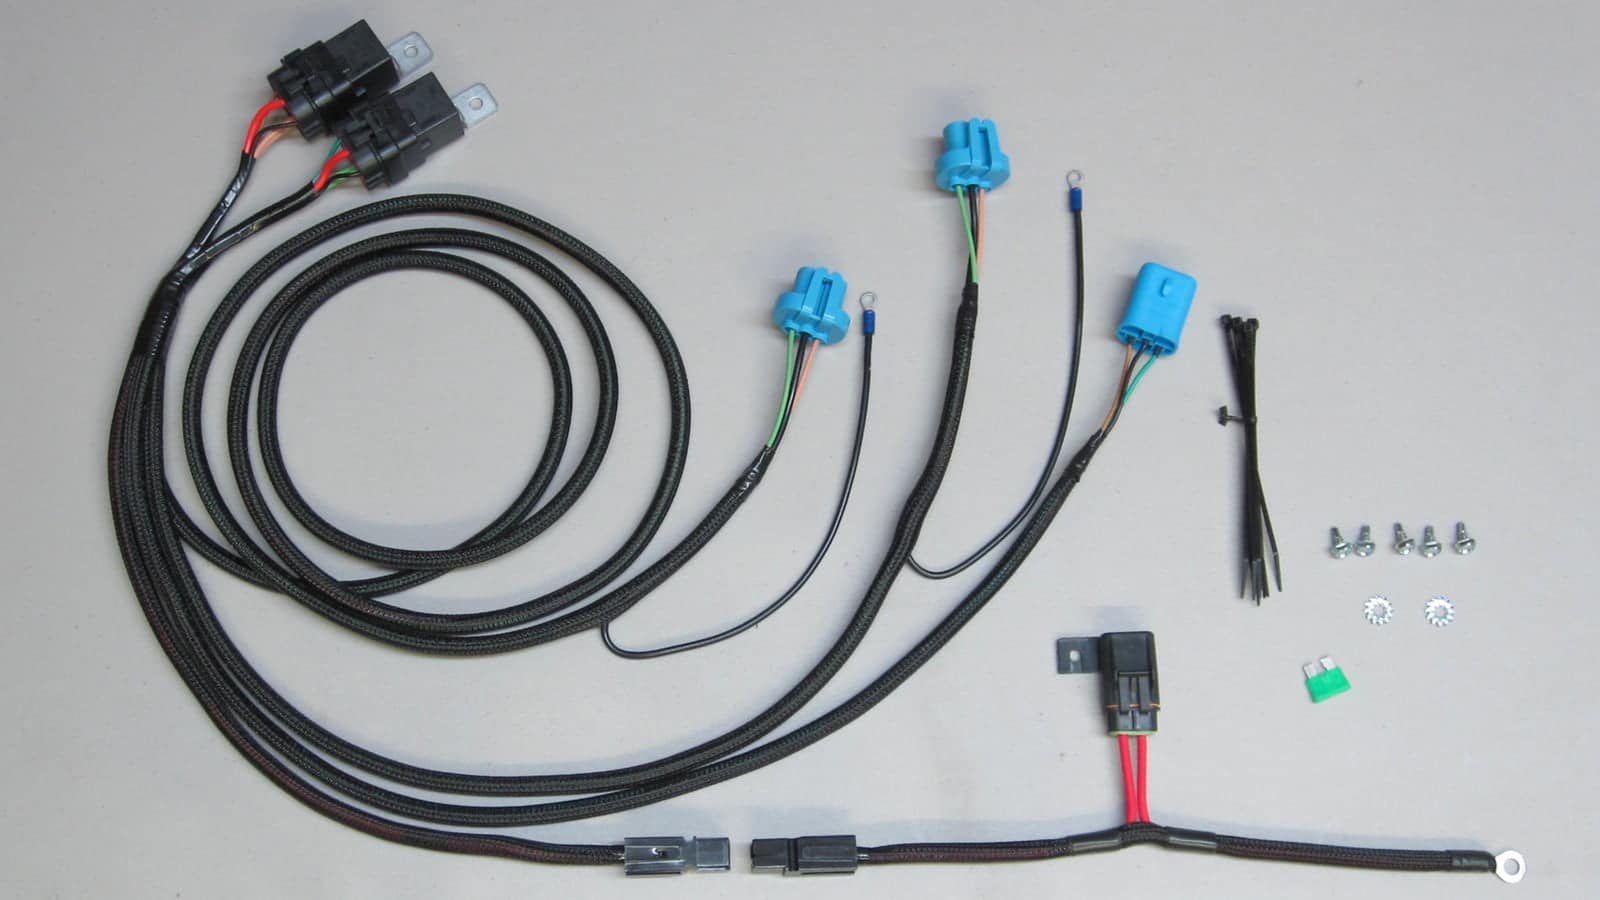 ... Wiring Harness Kit. Vehicle. Wiring Diagram And Schematic Diagram